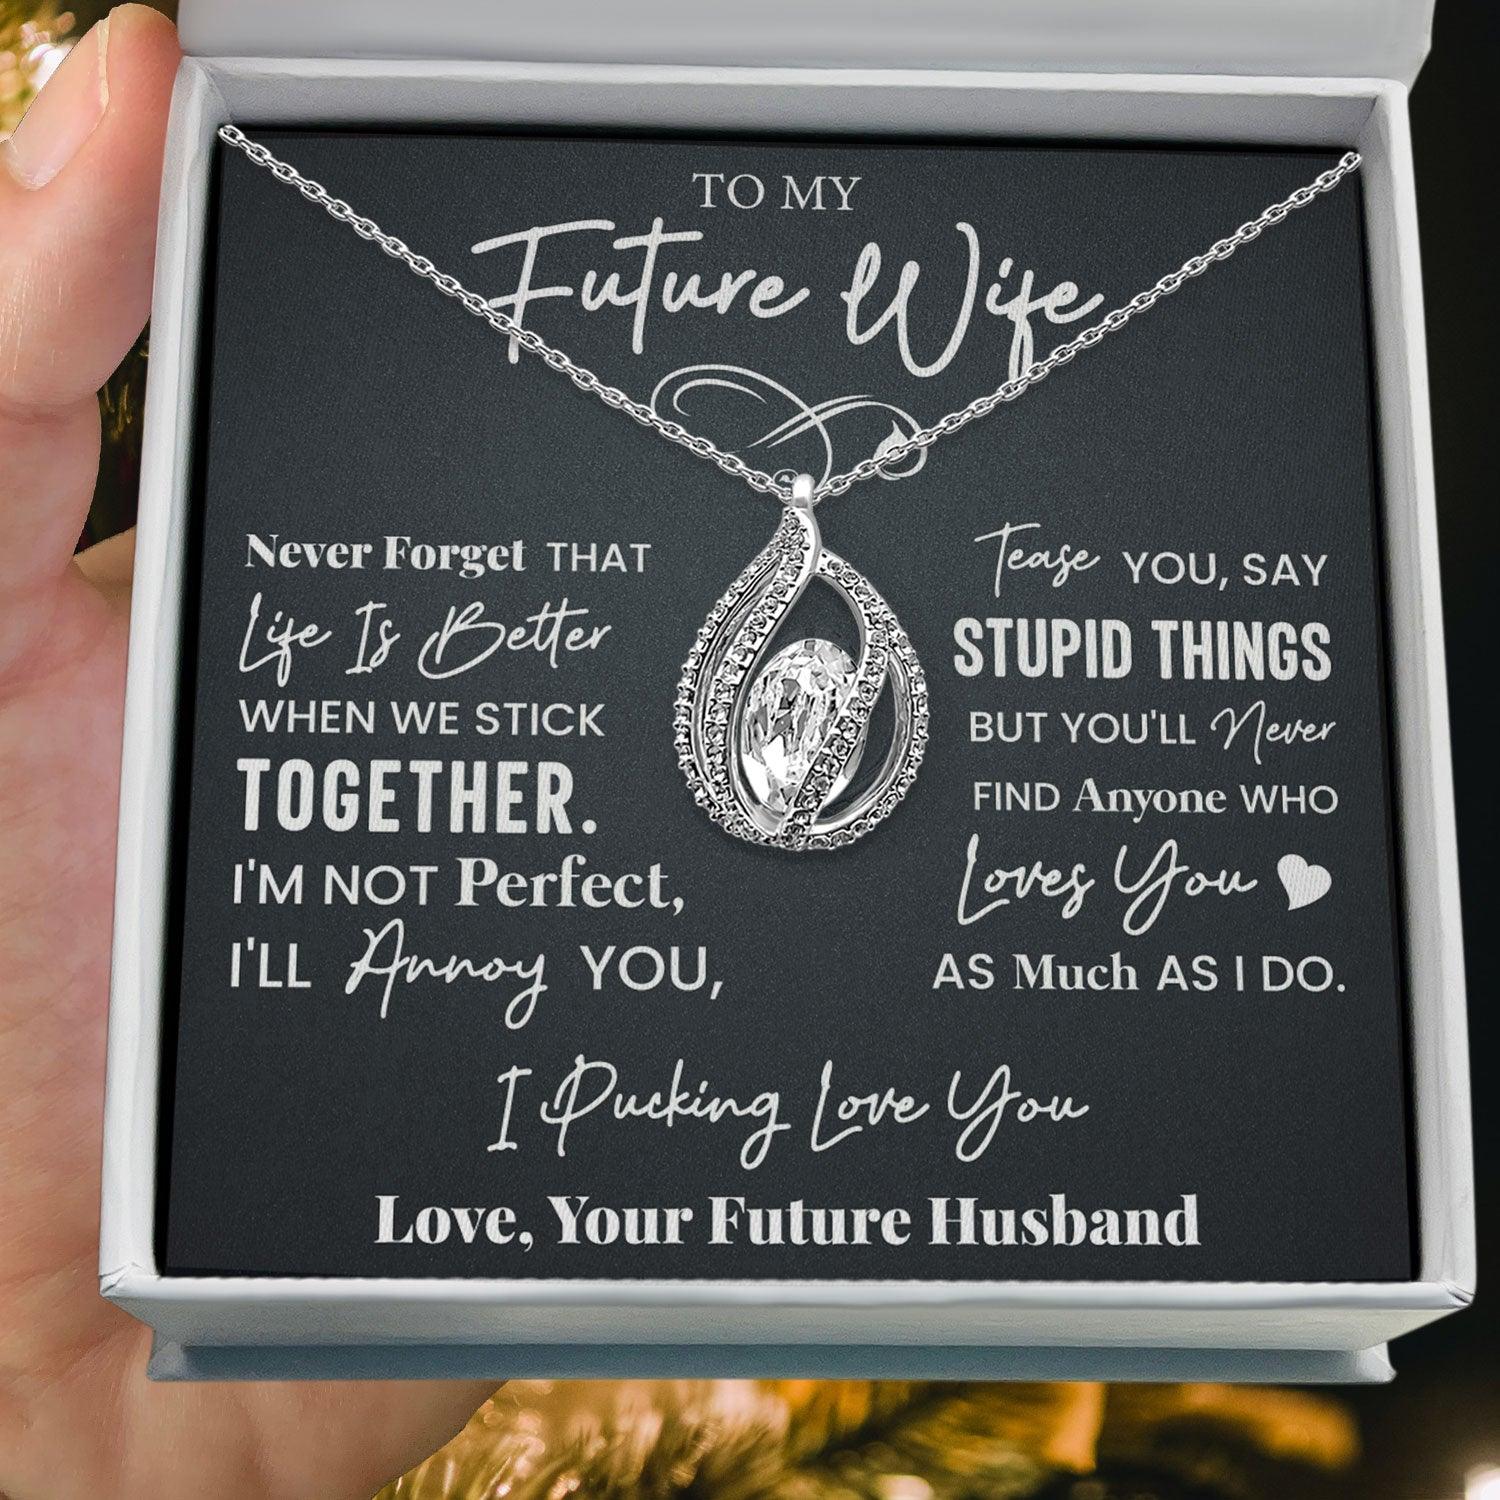 To My Future Wife - Never Forget That Life Is Better When We Stick Together - Orbital Birdcage Necklace - TRYNDI